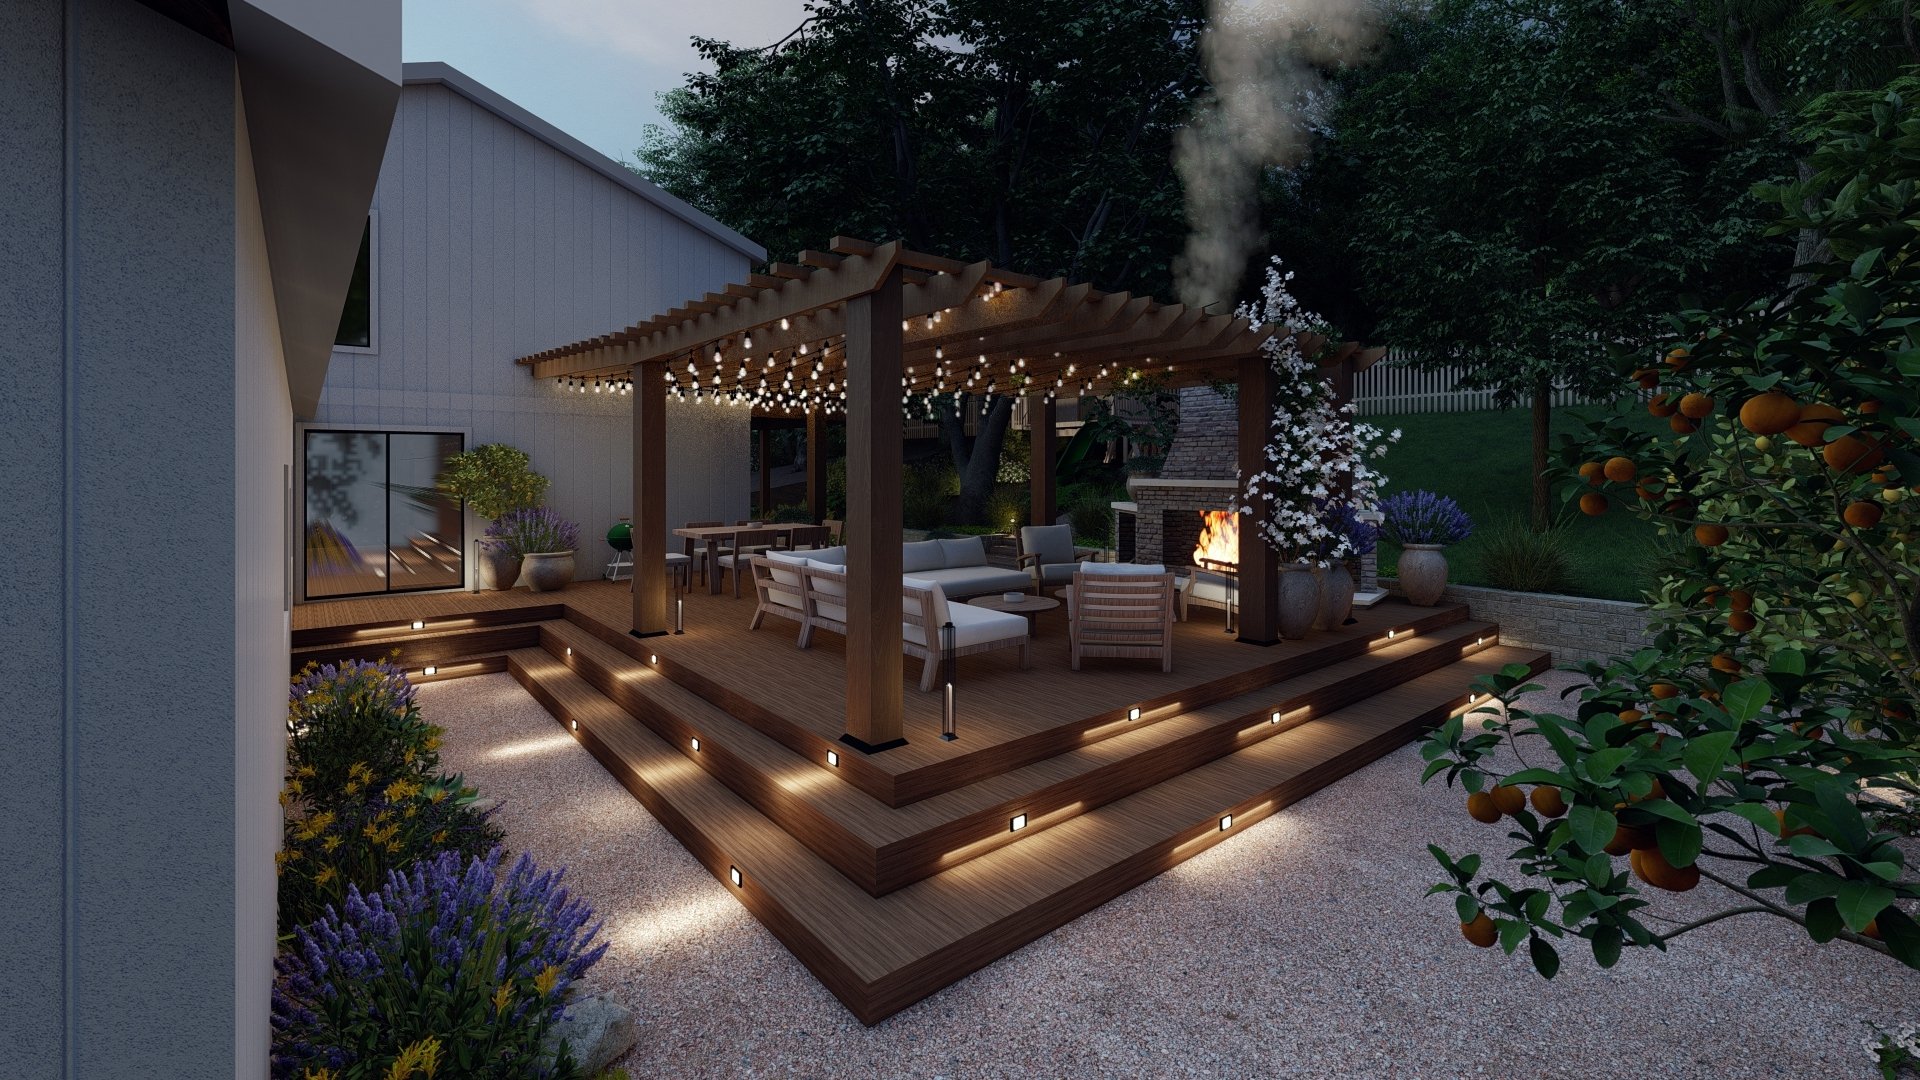 Custom outdoor fireplace under a pergola created the perfect evening entertaining space in Novato, CA